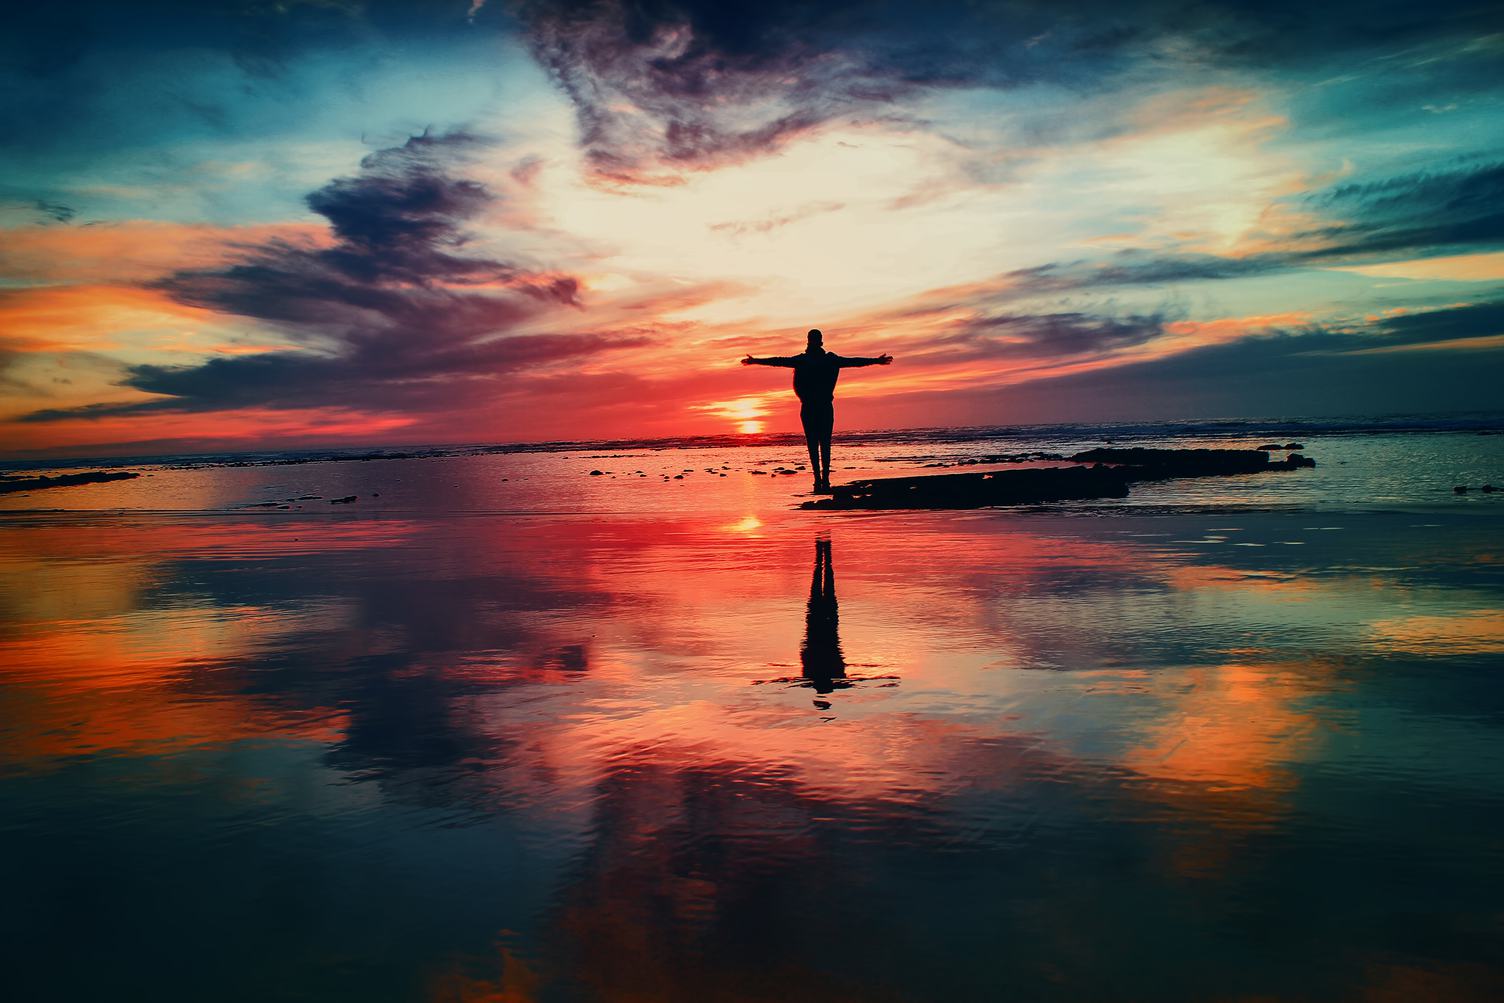 Men with Open Arms Standing in Water Against the Incredible Sunset Sky